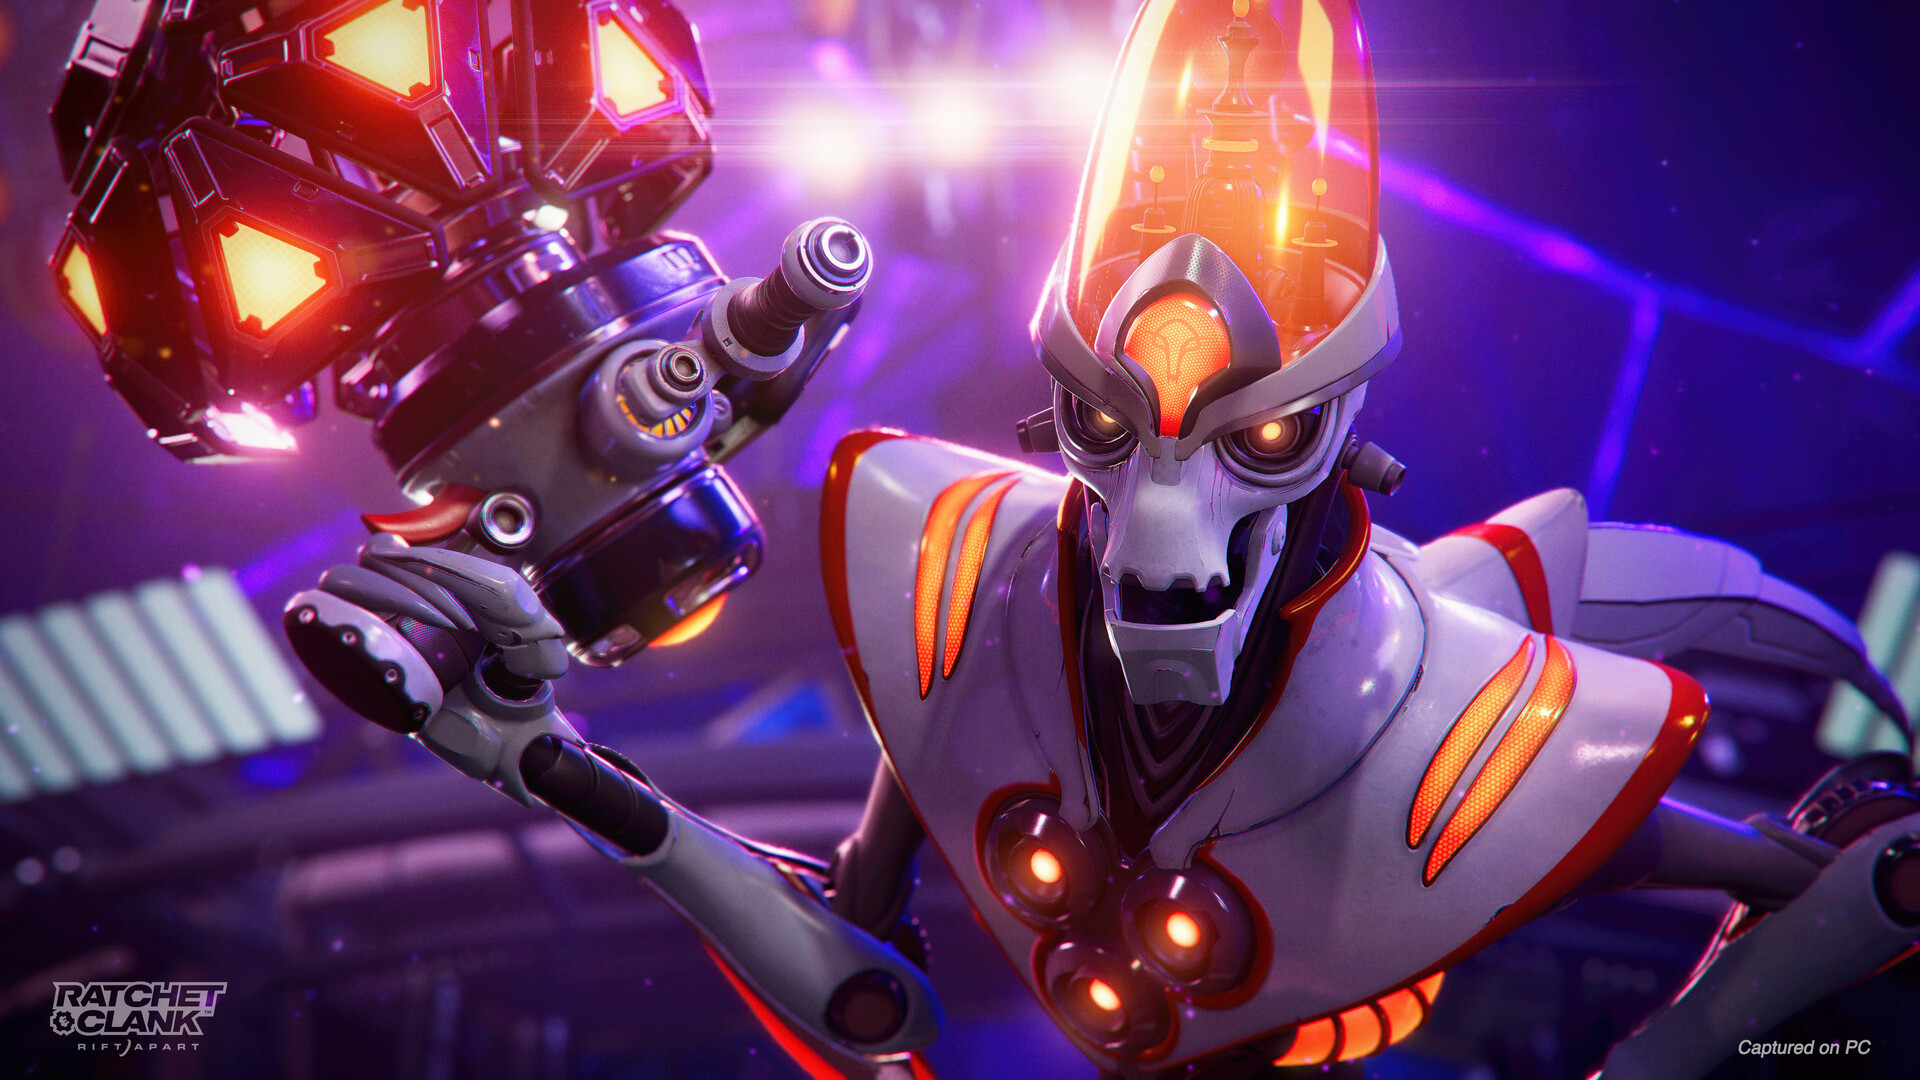 Pre-purchase Ratchet & Clank: Rift Apart on Steam